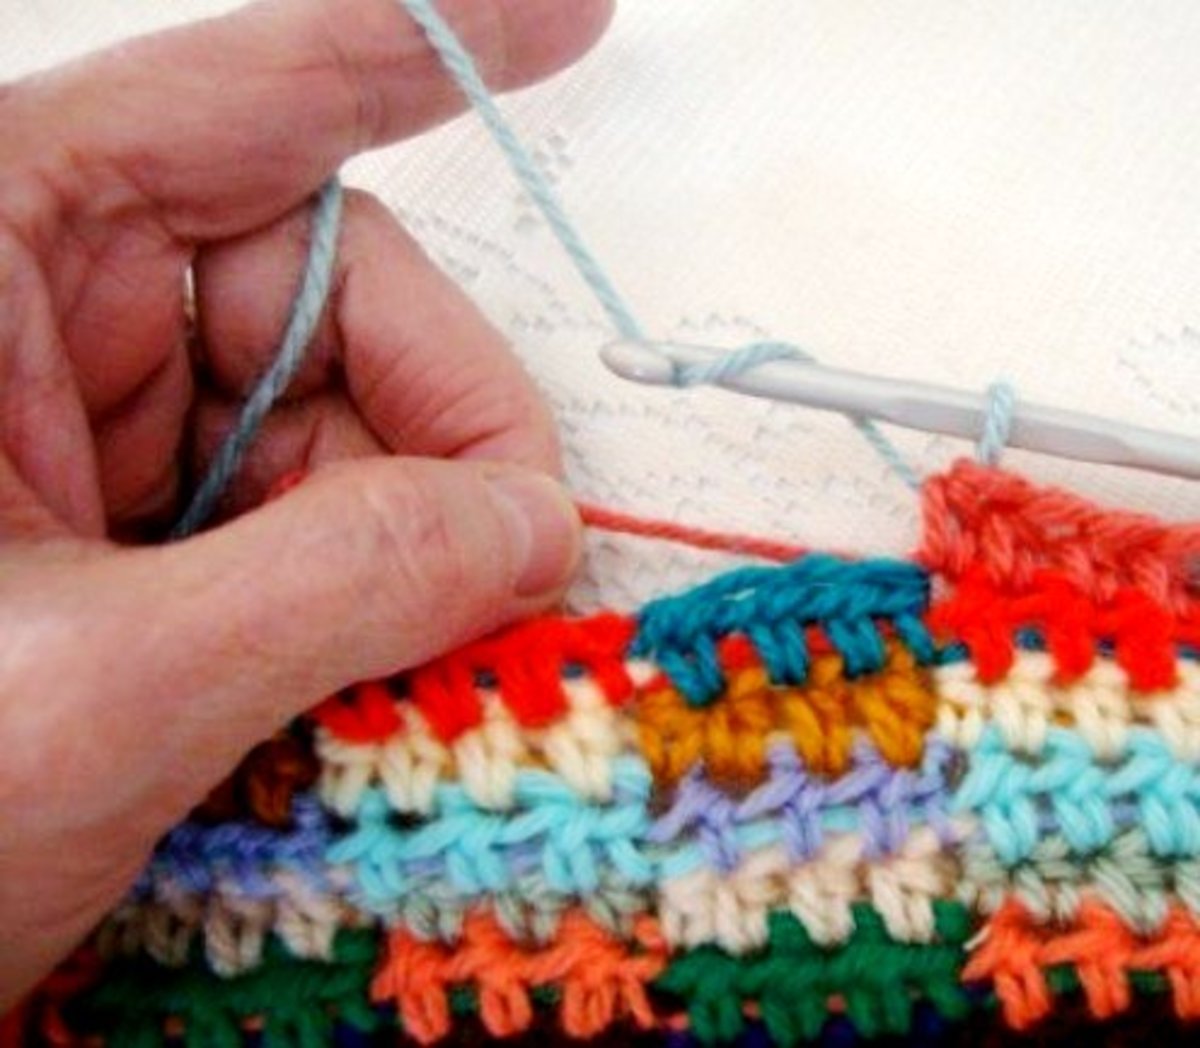 CARRYING COLOR: gently pull on yarn strand (rust) so it doesn't loop or bunch up